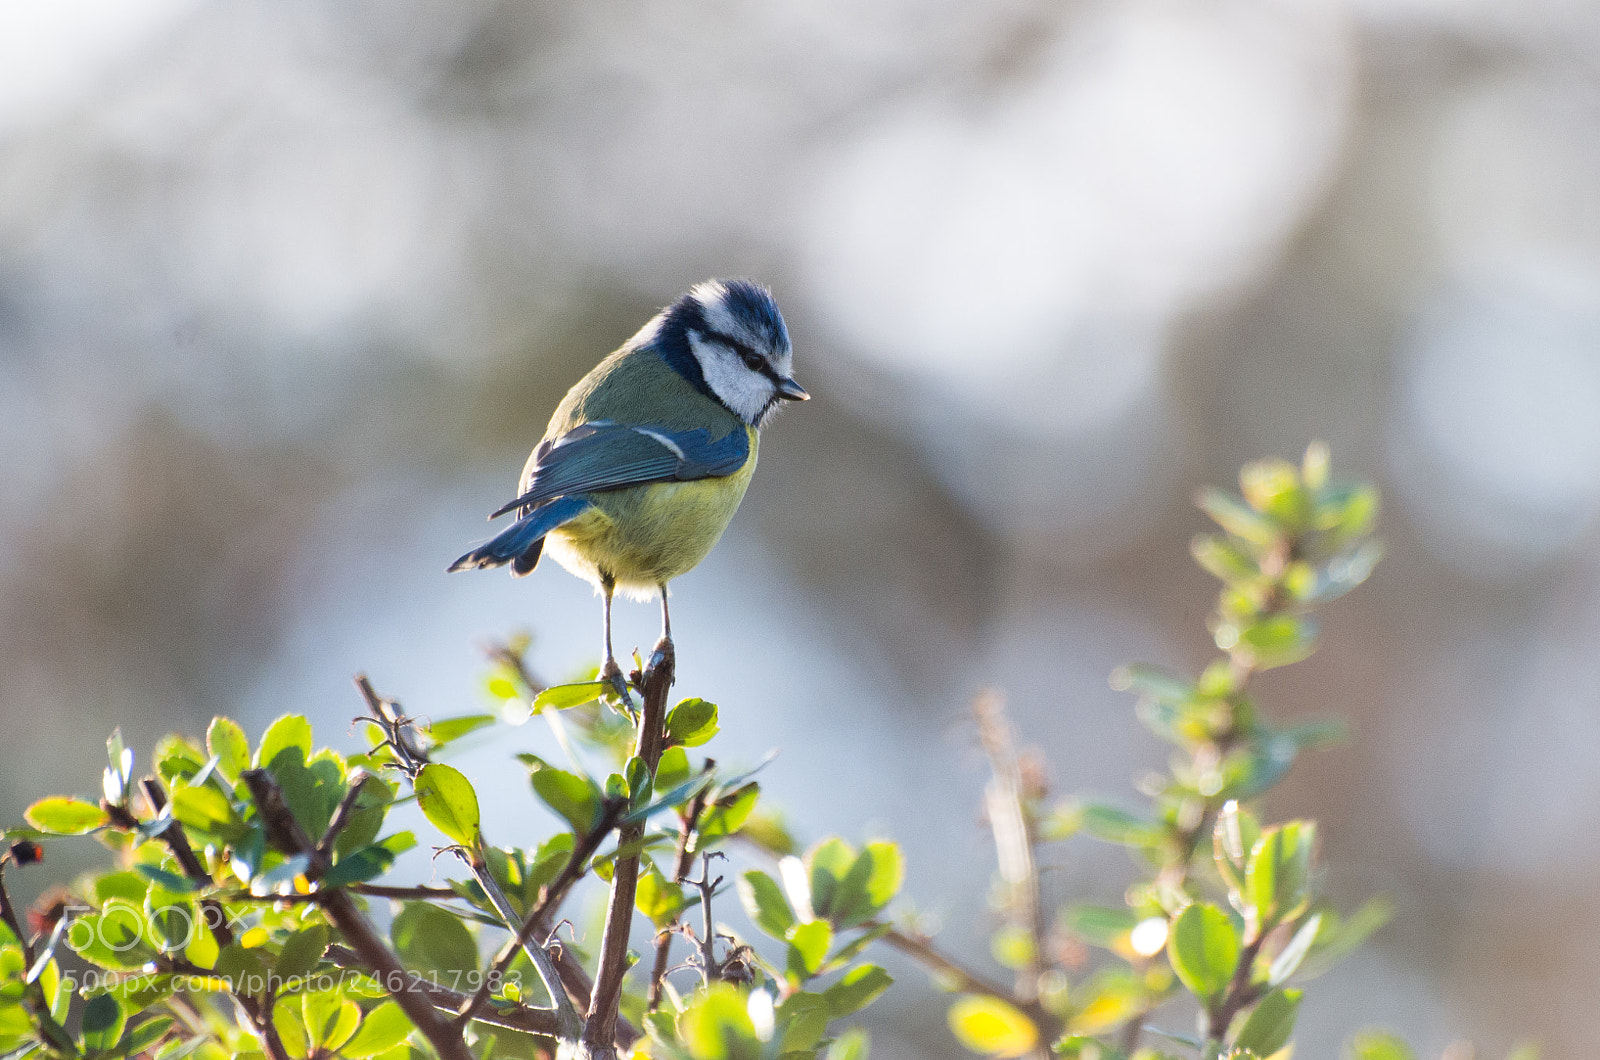 Pentax K-30 sample photo. A small tit photography